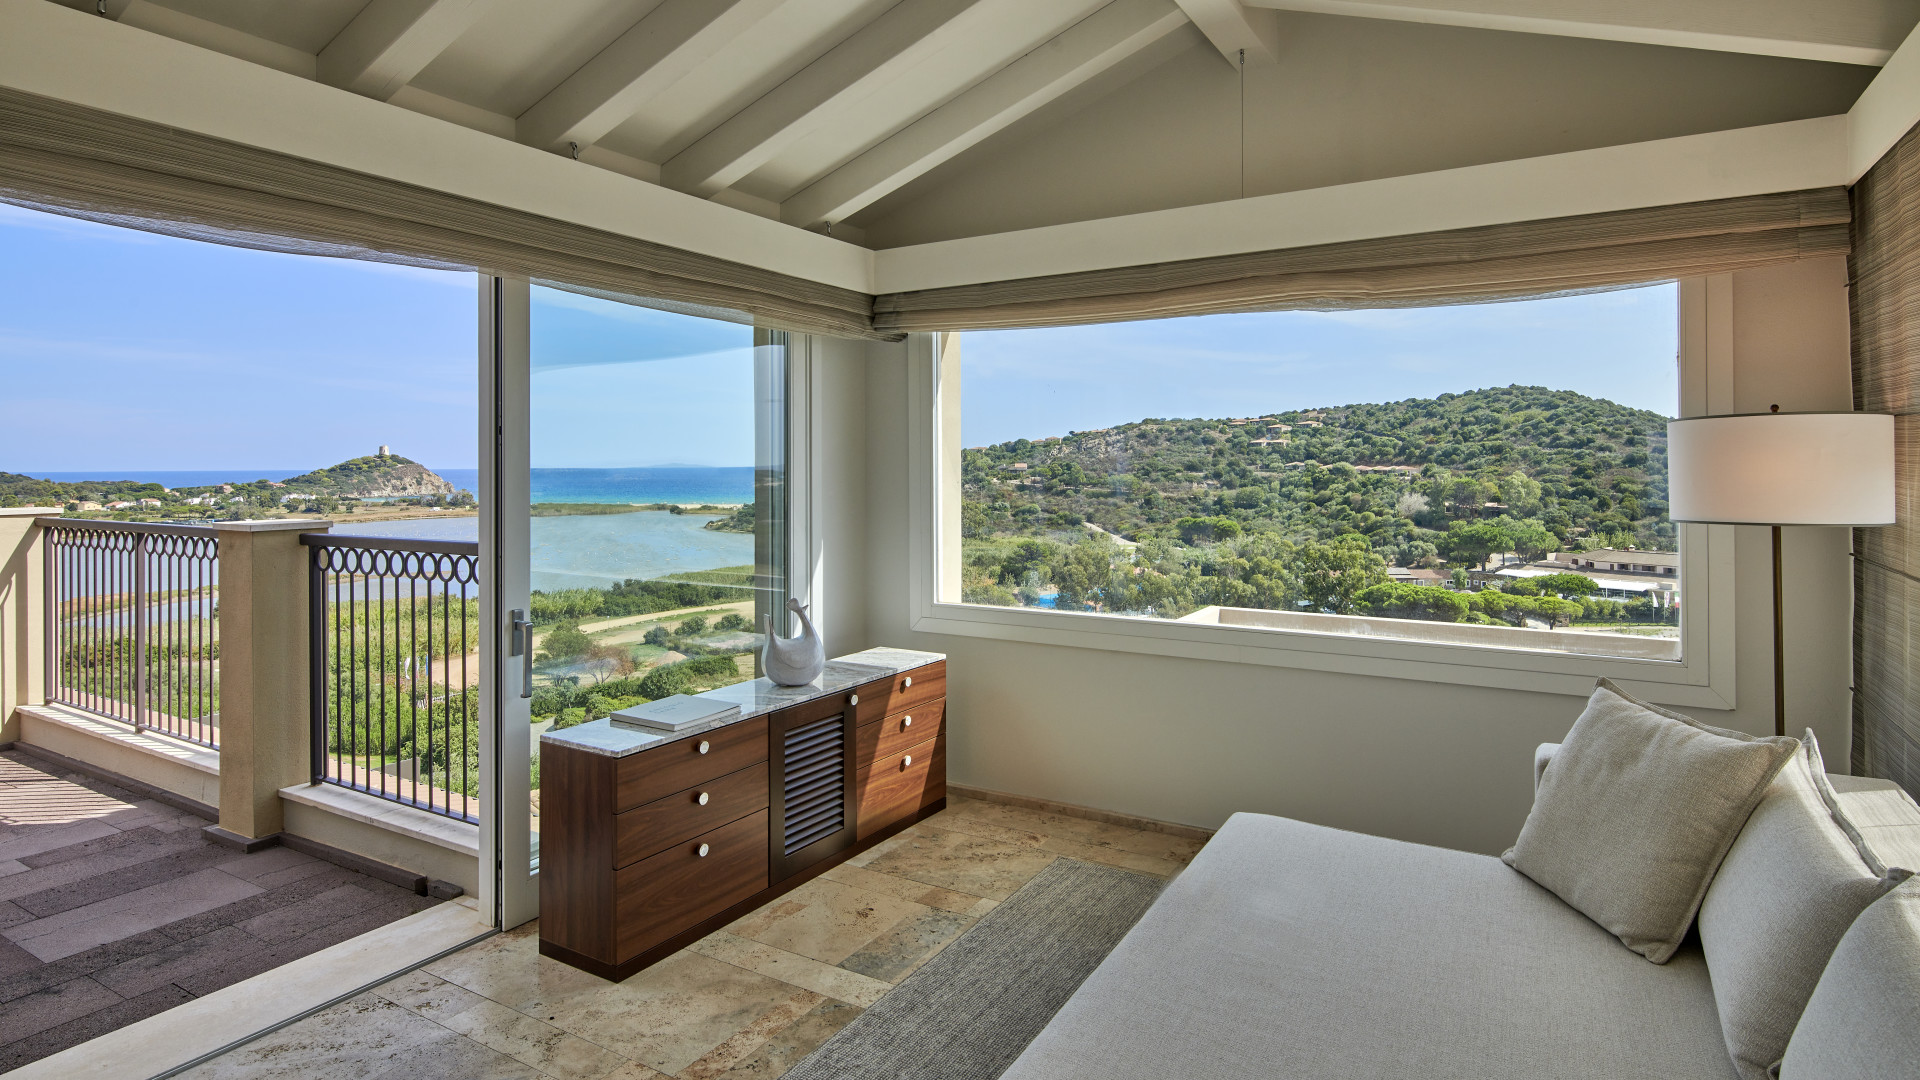 Suite living room with view of ocean and surrounding area